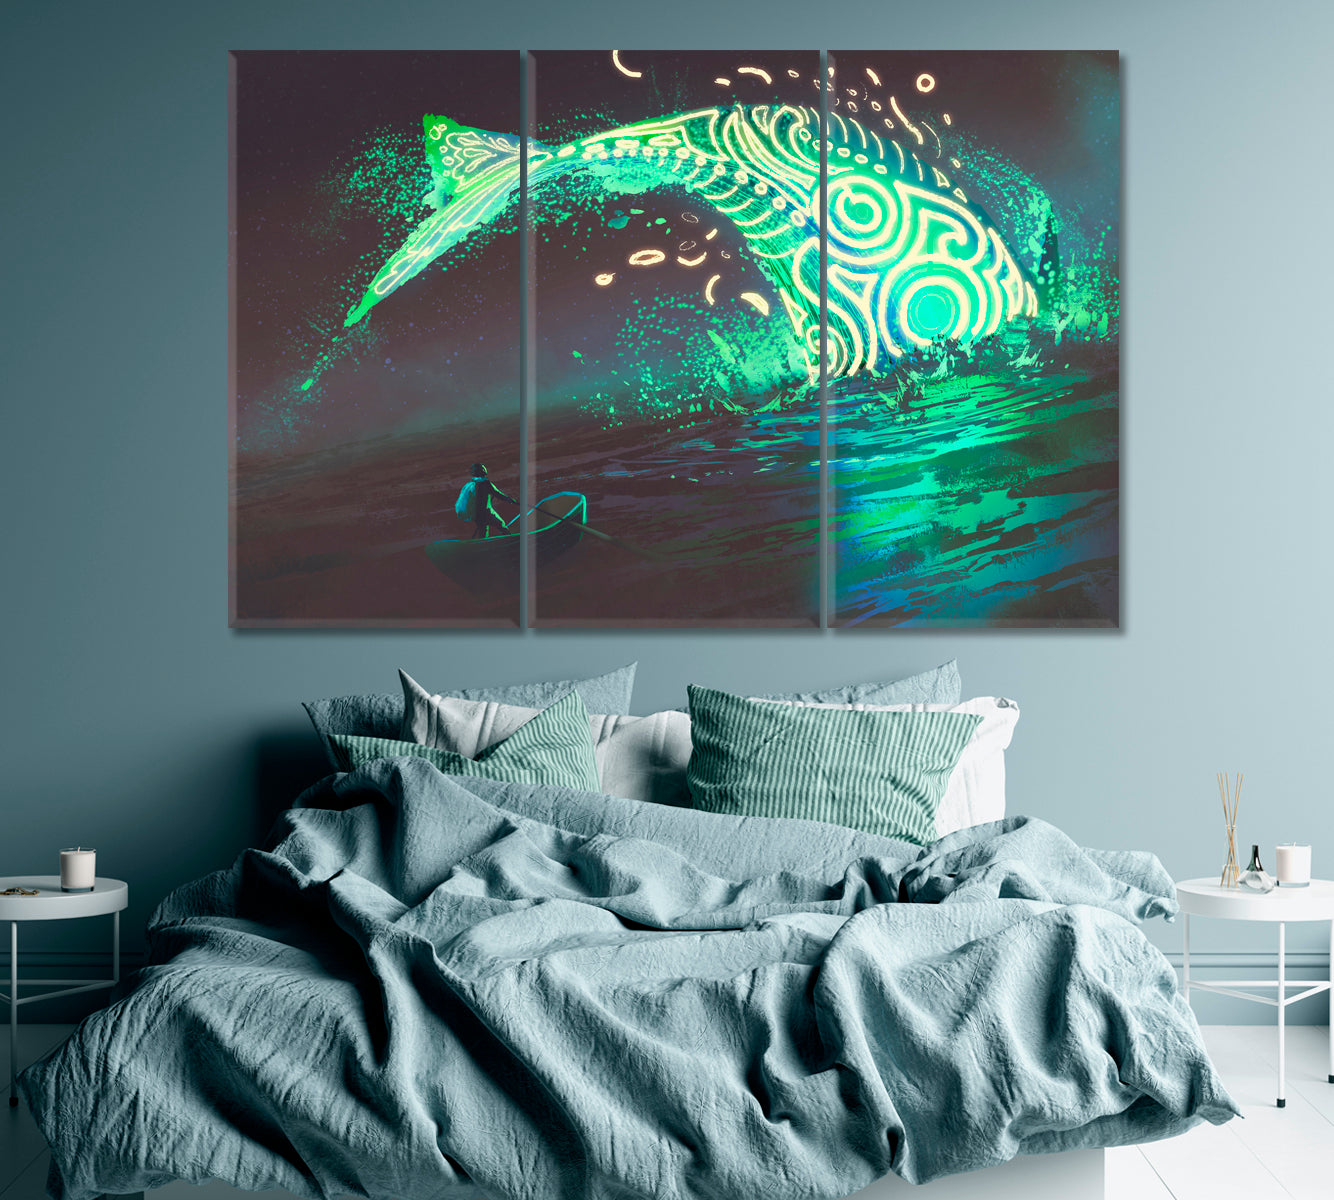 Man on Boat and Glowing Whale in Sea Canvas Print ArtLexy 3 Panels 36"x24" inches 